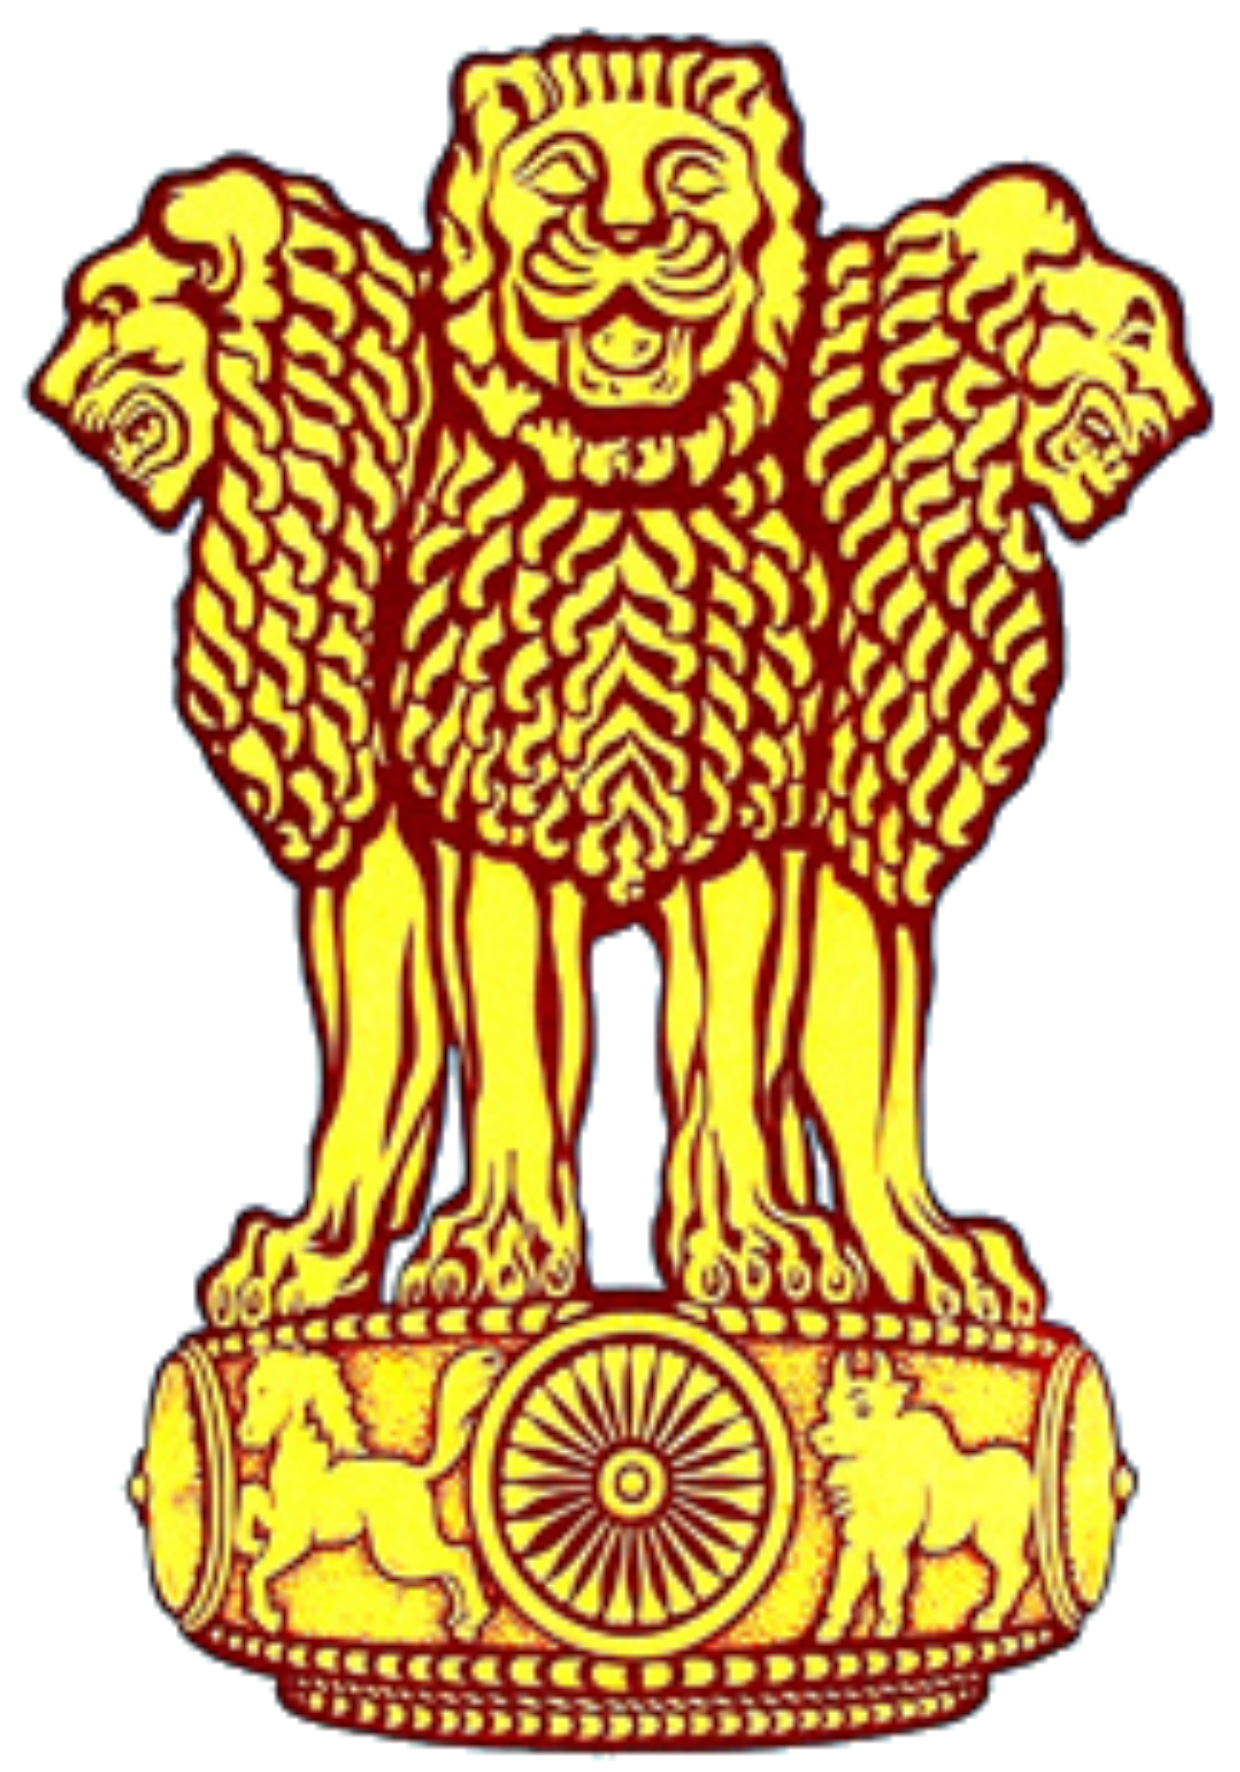 Coat of arms of India PNG images free download